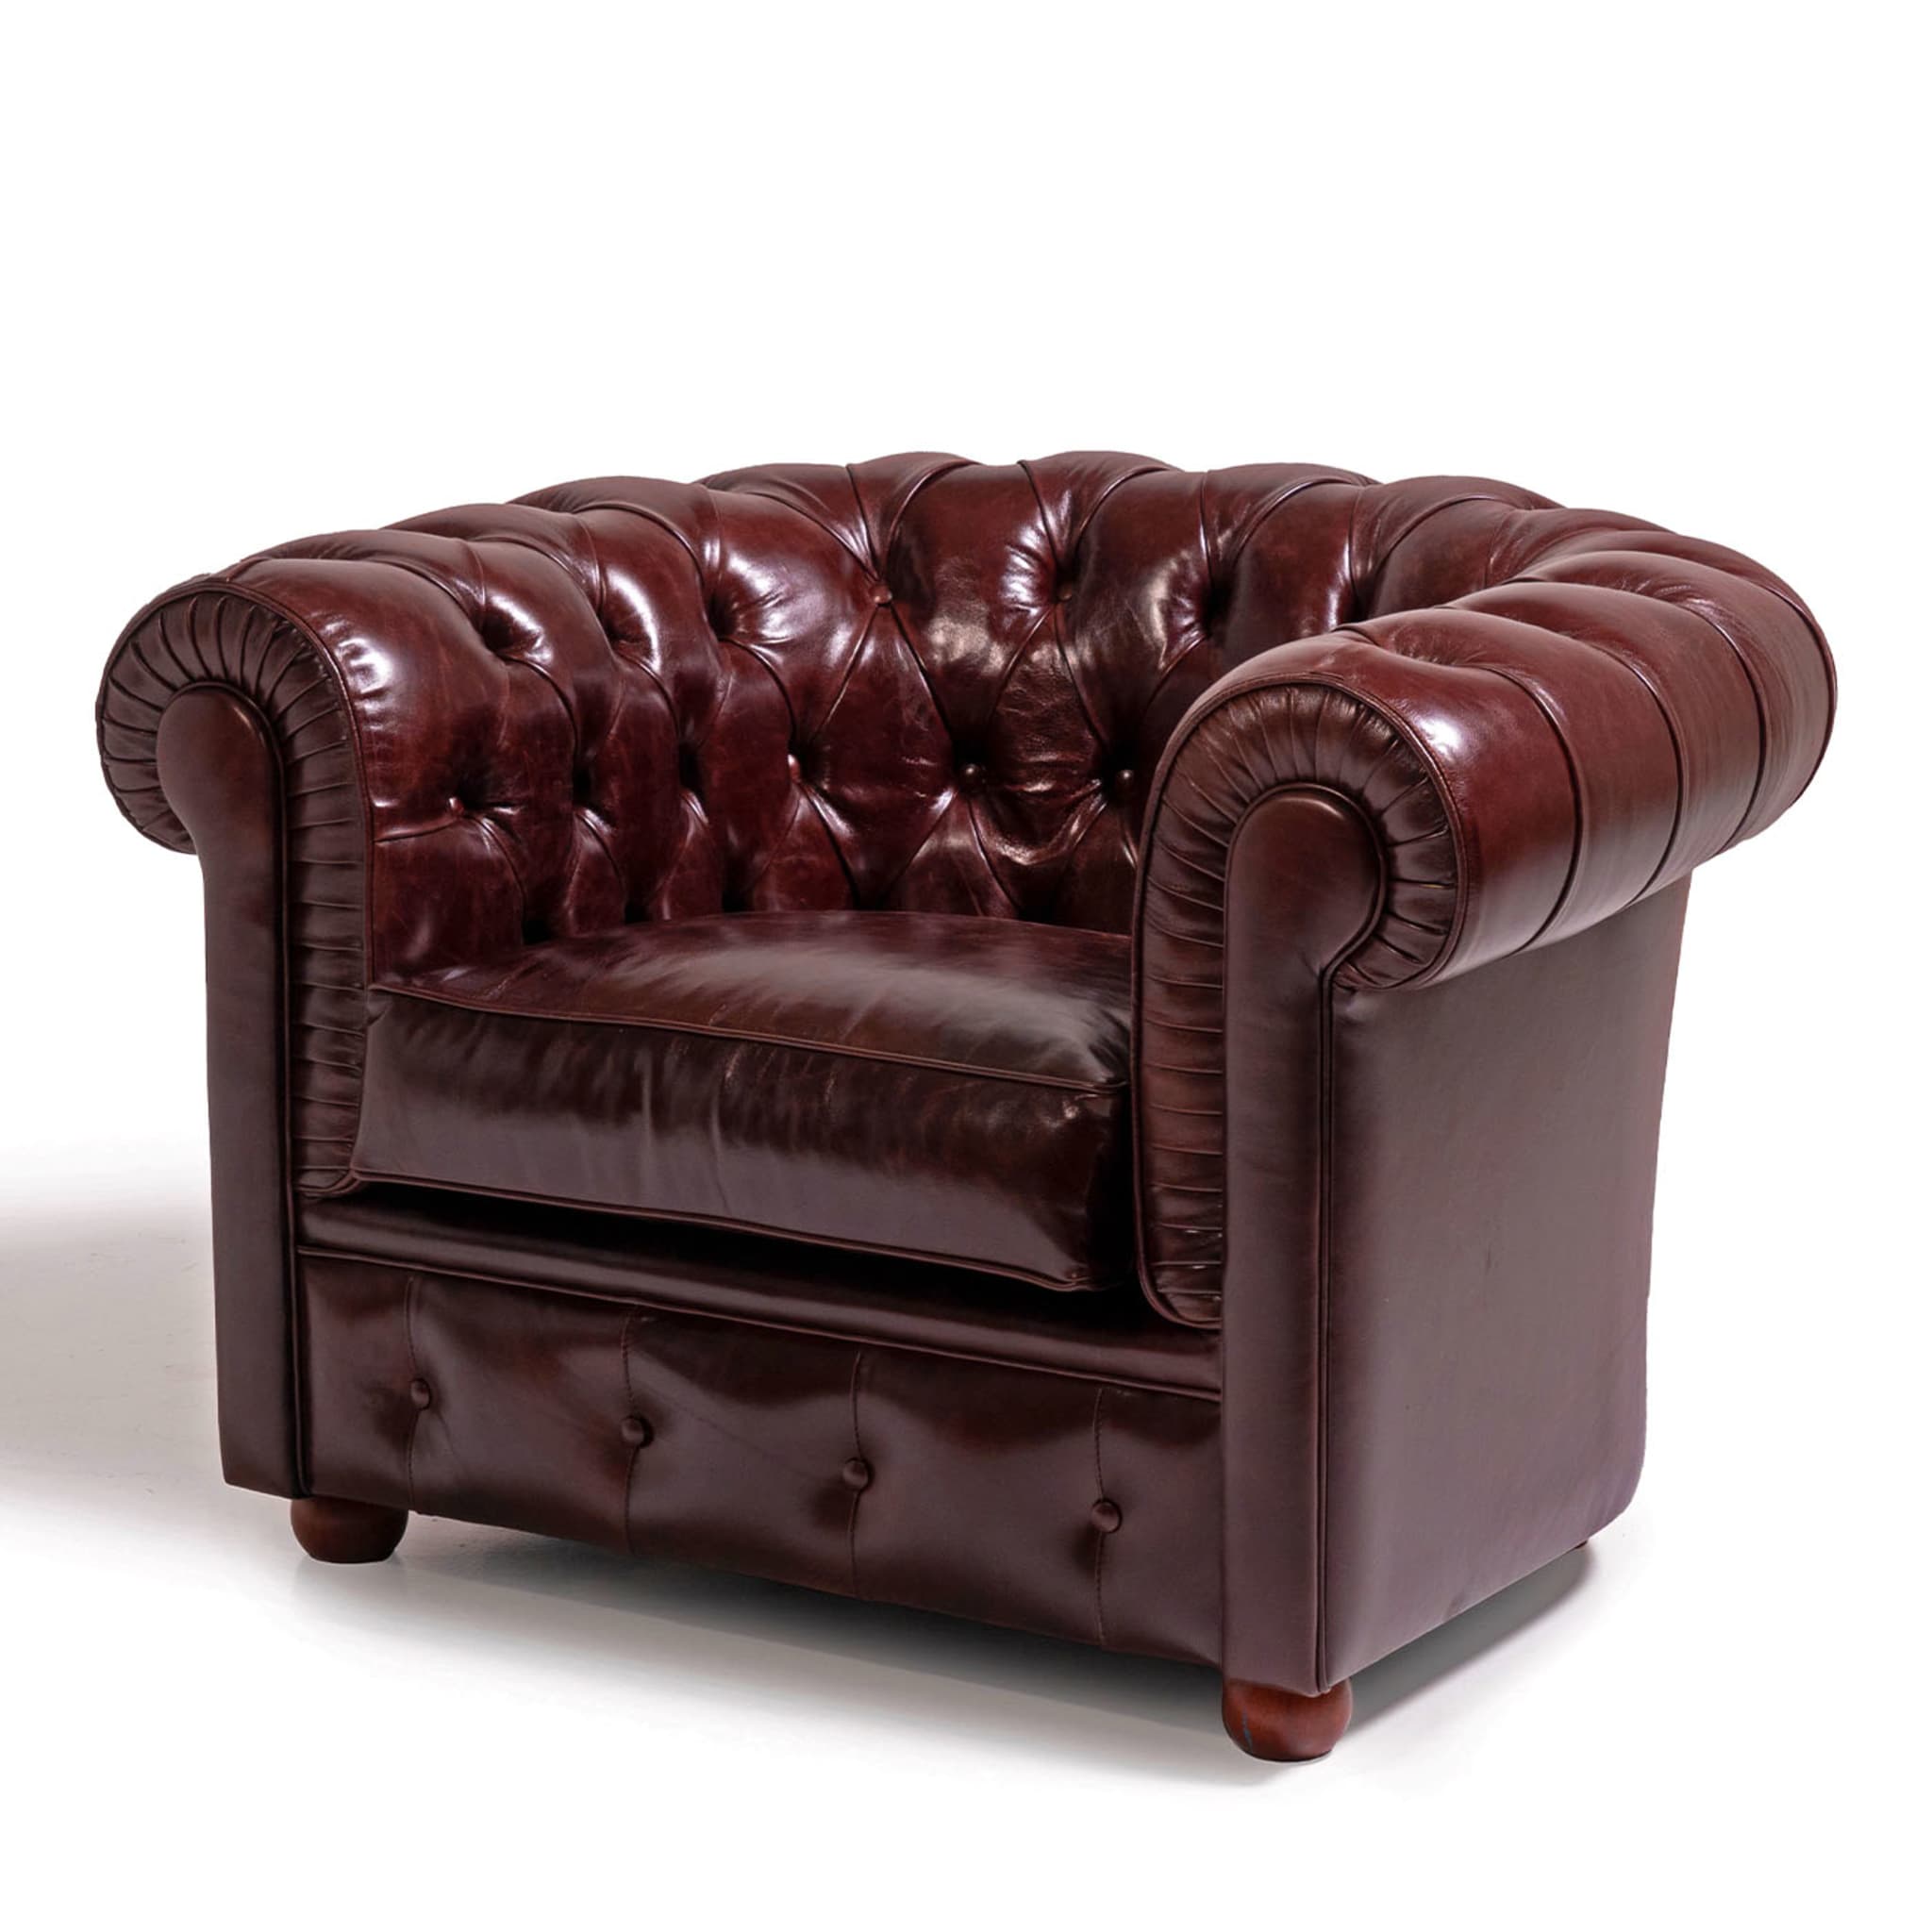 Chesterfield Ruby Leather Armchair Tribeca Collection - Alternative view 3